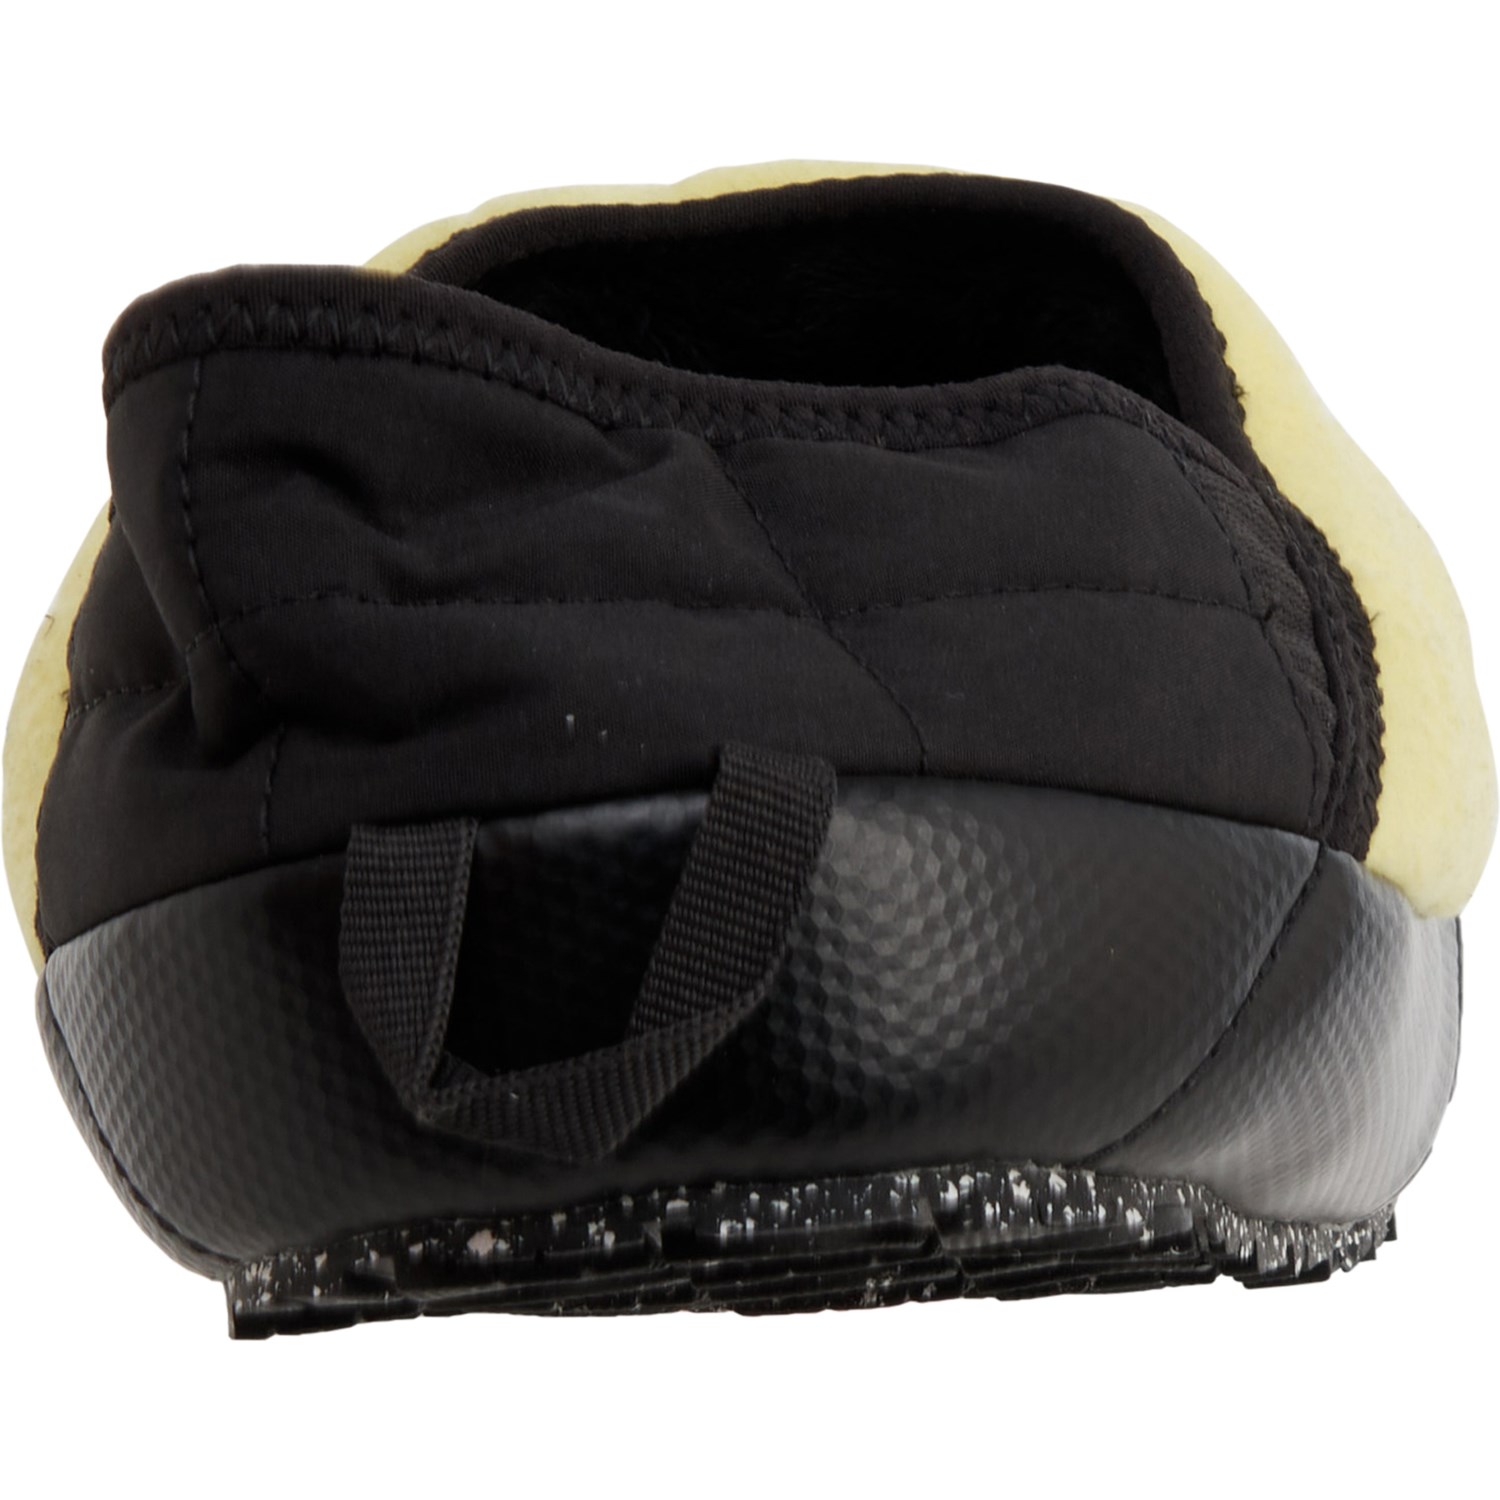 The North Face ThermoBall® Traction Mule V Denali Shoes (For Men)